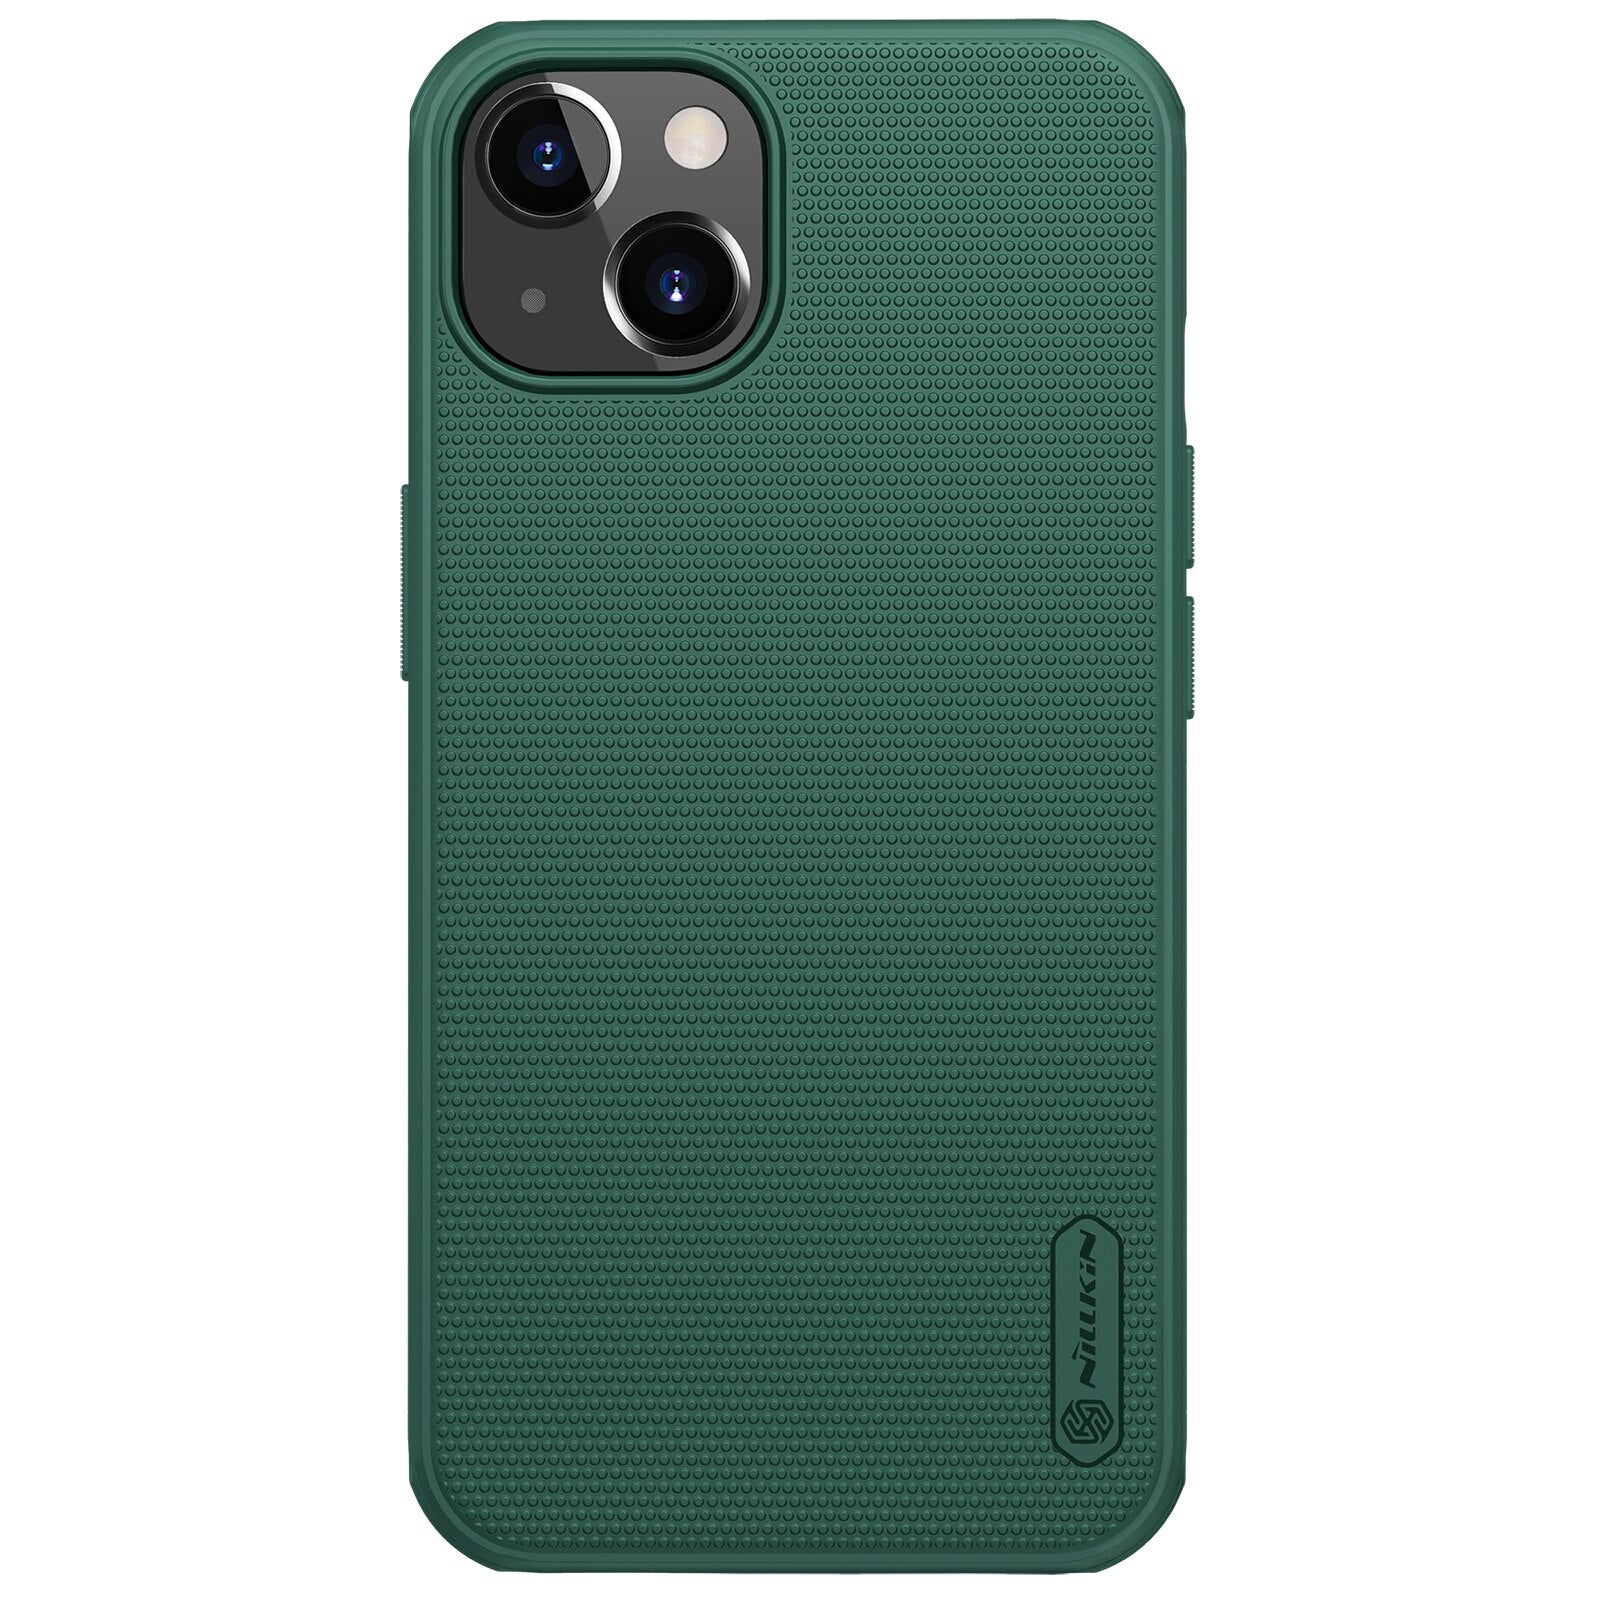 Case For Apple iPhone 13 Pro Max Case for iPhone 13 Mini Cover NILLKIN Super Frosted Shield matte hard back cover Mobile phone shell - 380230 for iPhone 13 Mini / green / United States Find Epic Store